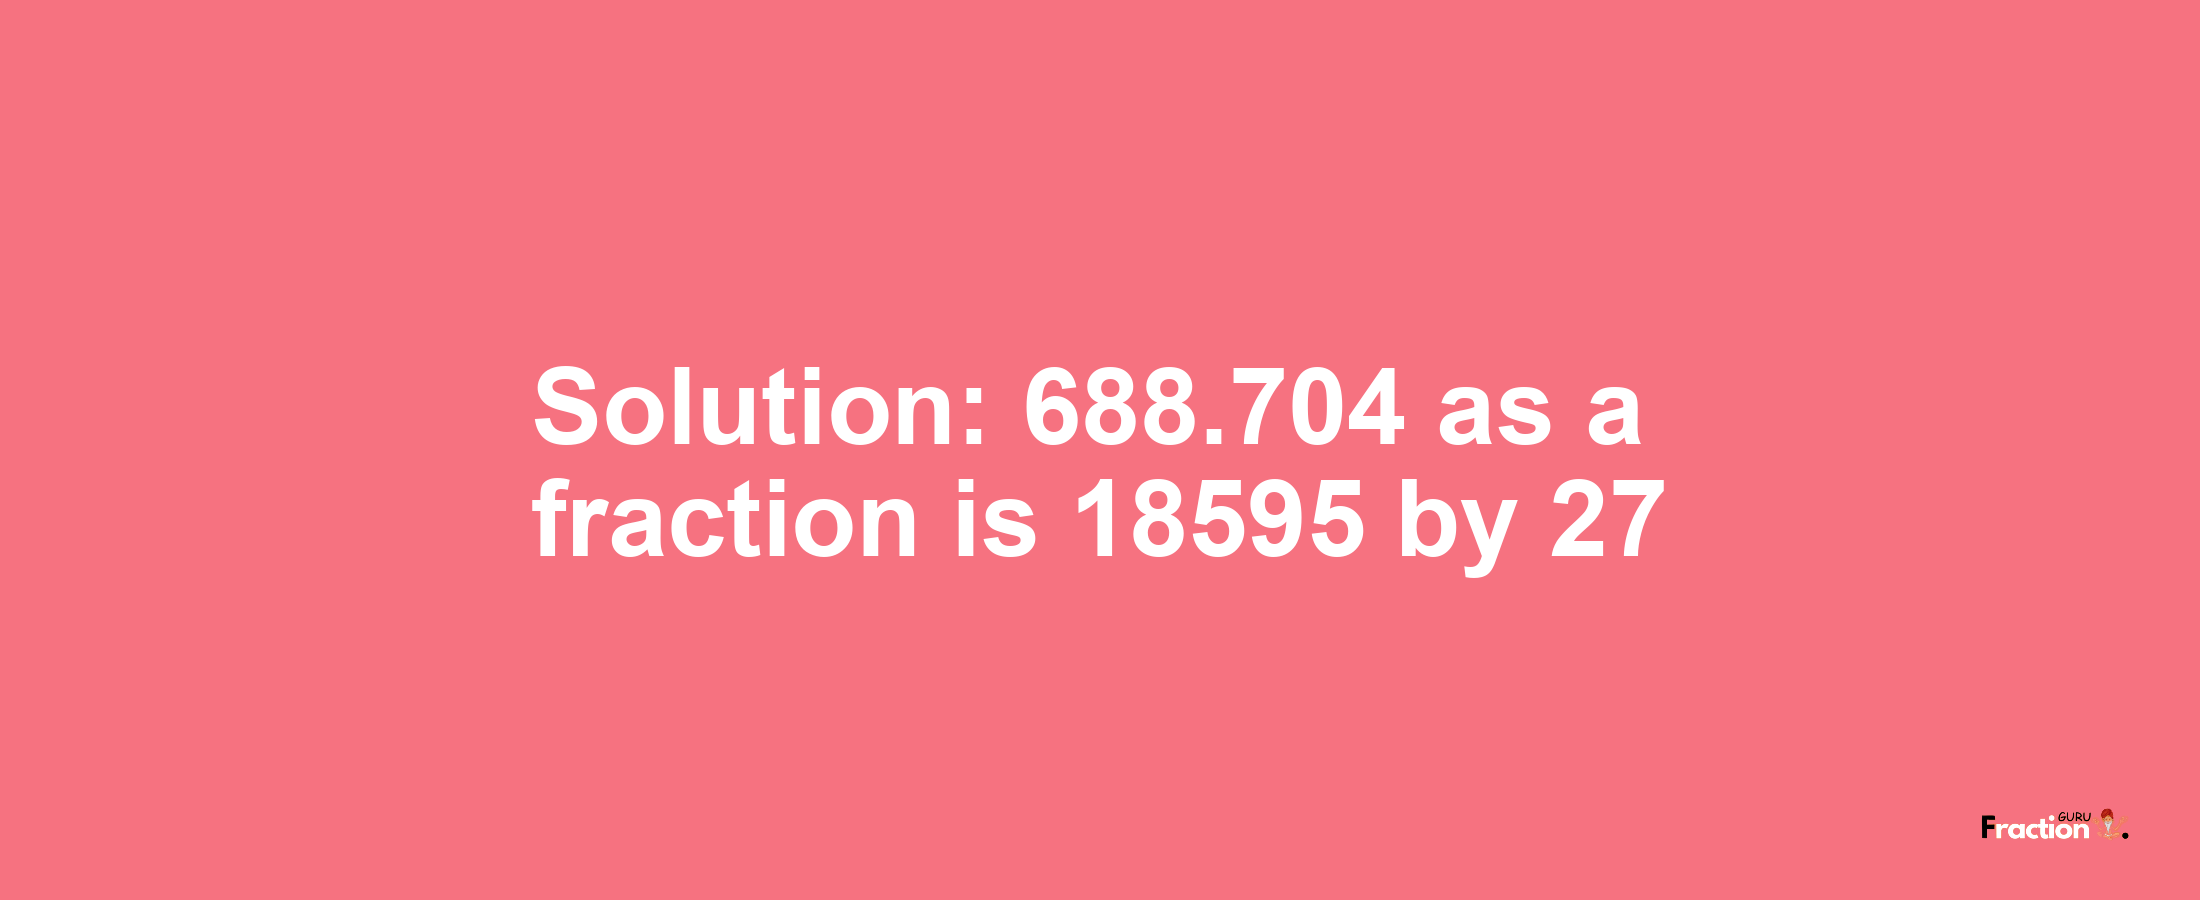 Solution:688.704 as a fraction is 18595/27